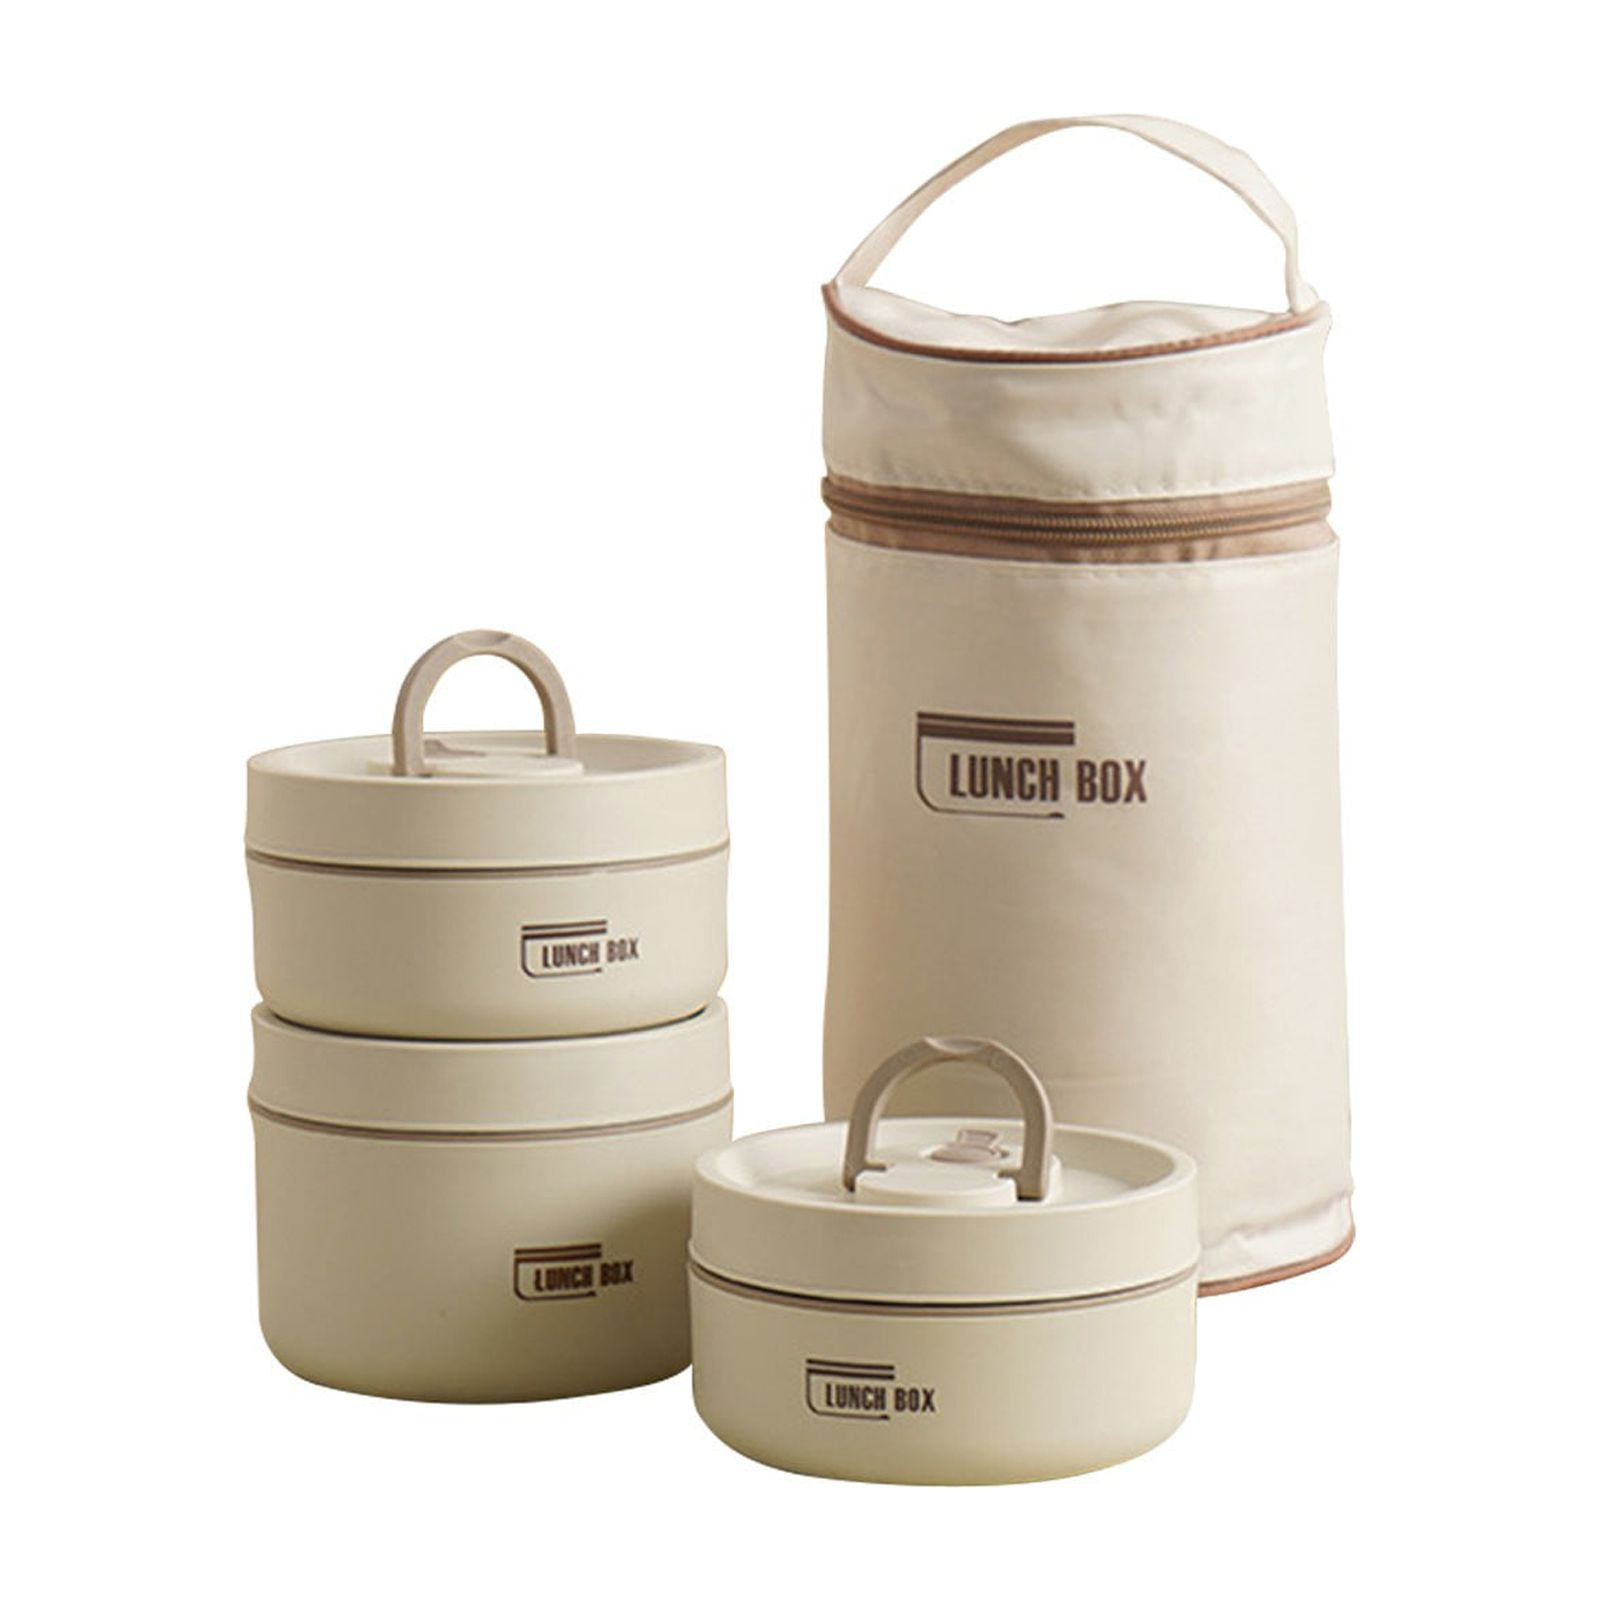 Thermal Lunch Box Set, Portable Insulated Lunch Containers with